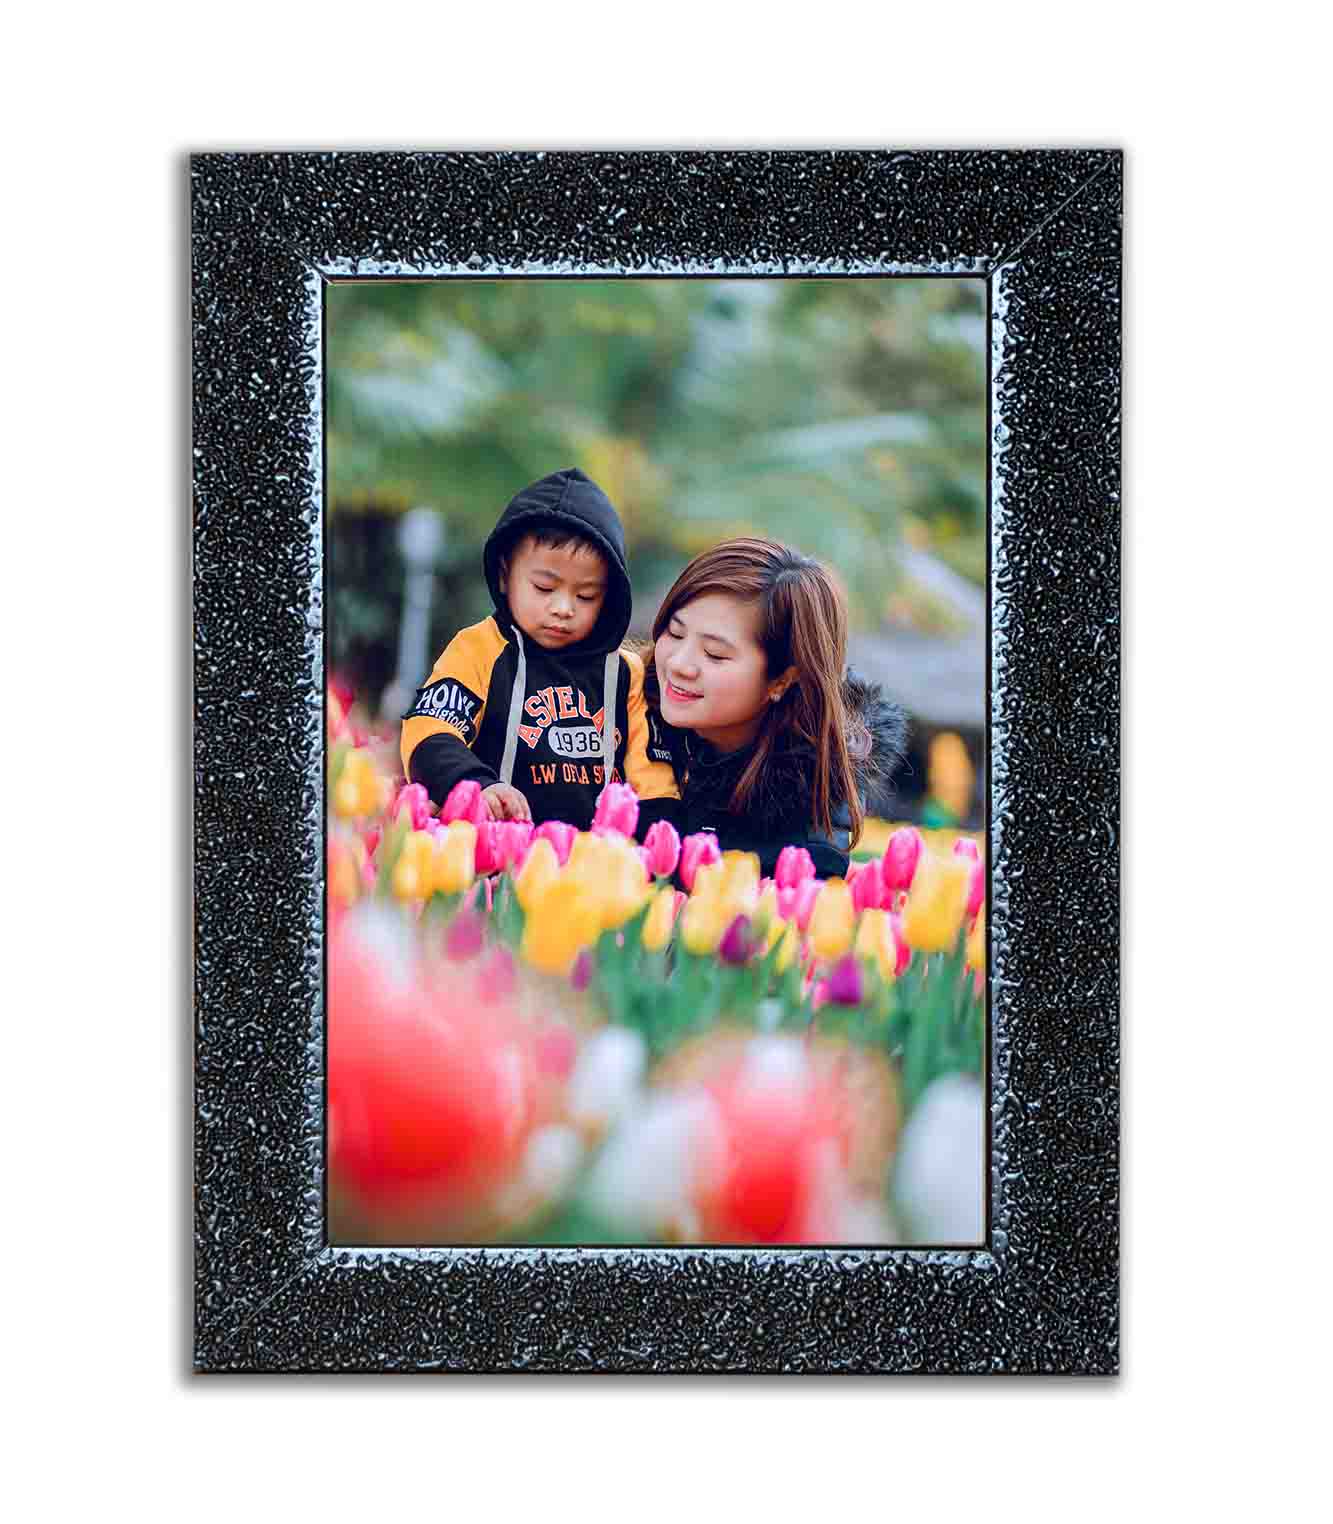 A6 Size (4x6 inch) Frame With Photo Print ( Black Frame )